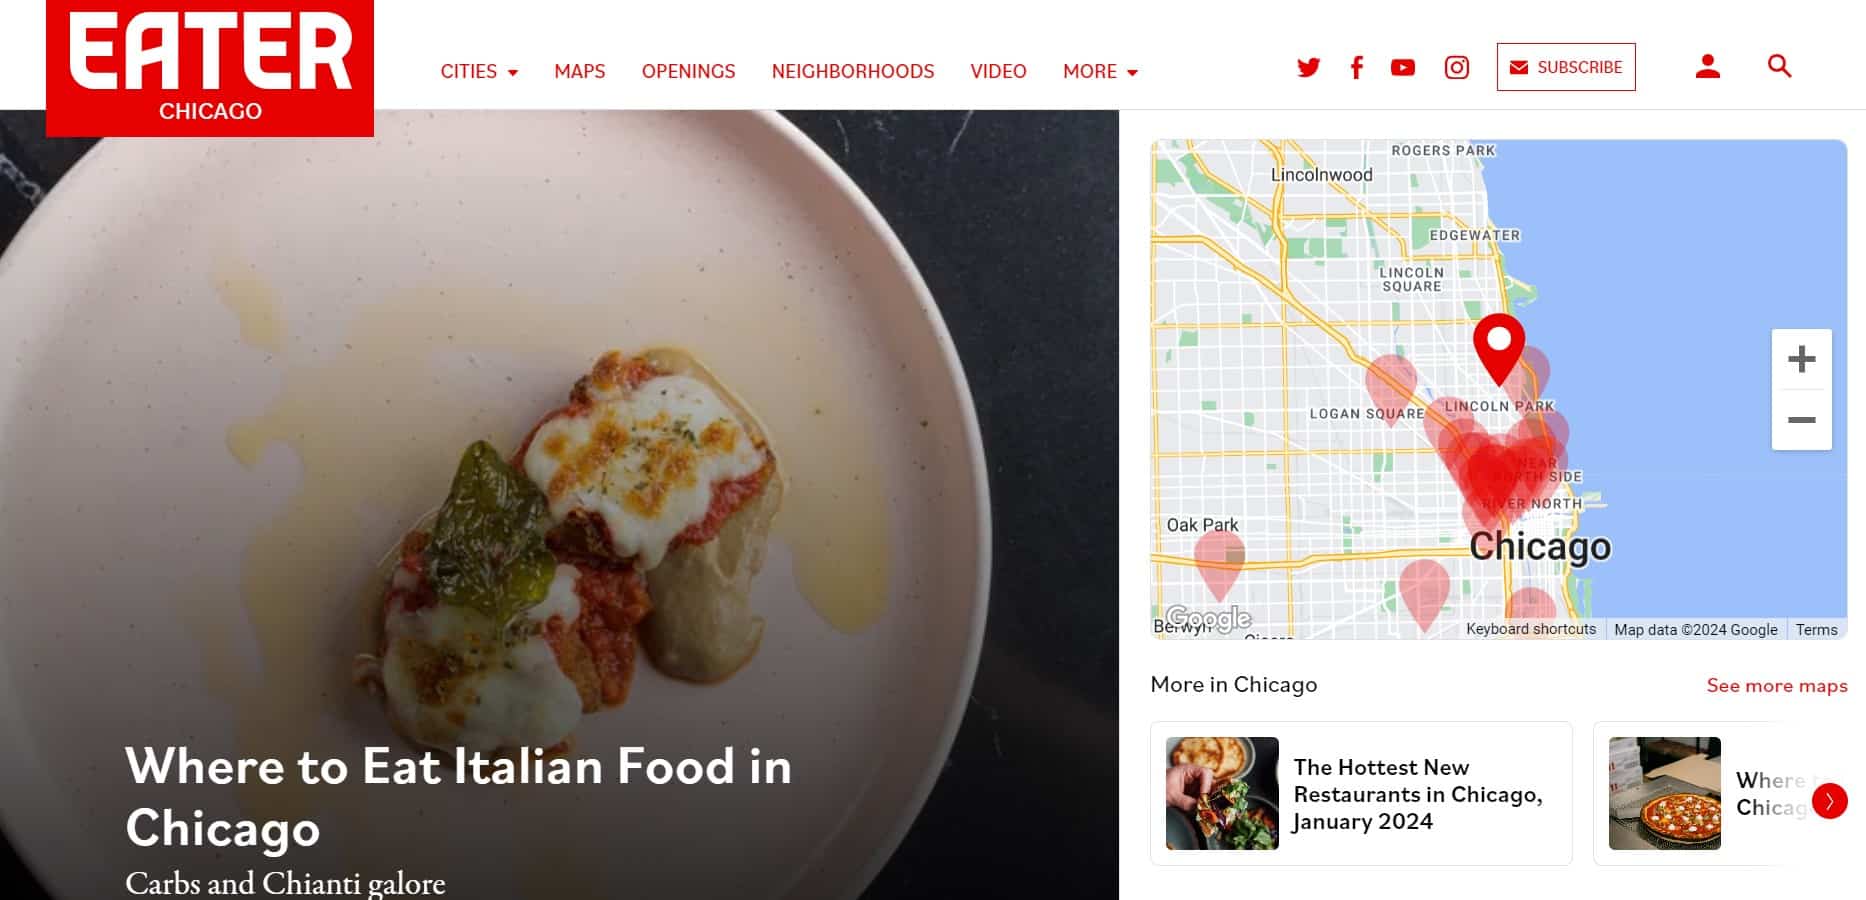  A landing page listing top Italian restaurants in Chicago on Eater